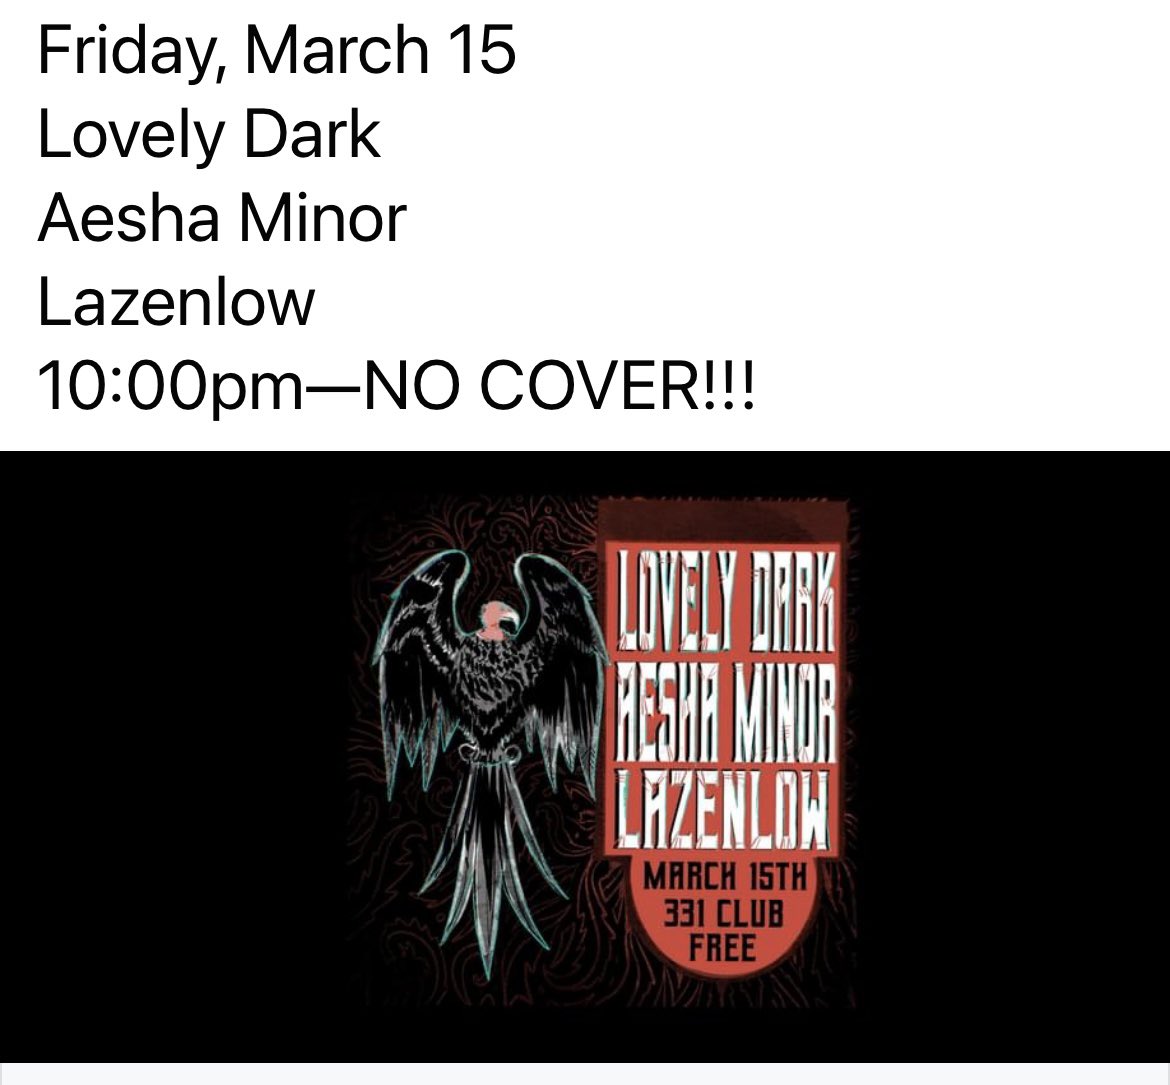 Friday, March 15
Lovely Dark
Aesha Minor
Lazenlow
10:00pm—NO COVER!!!